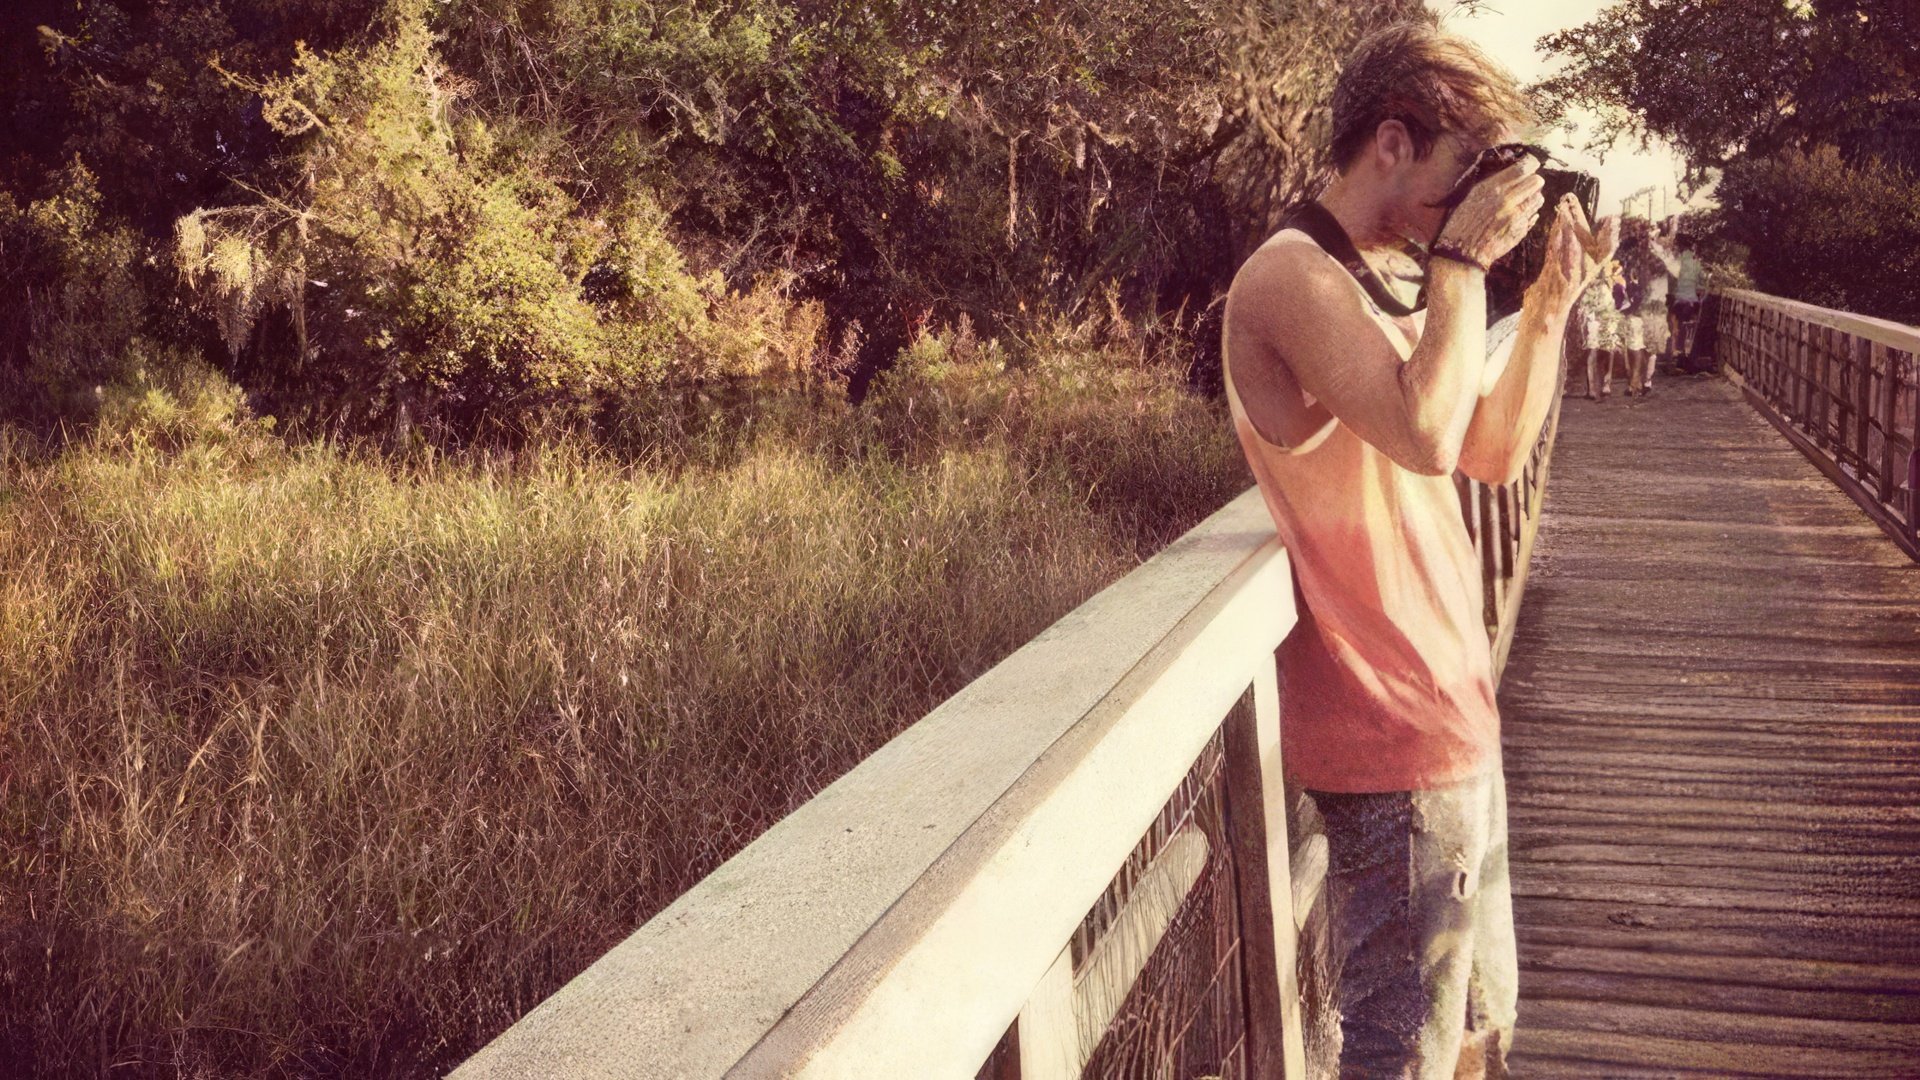 Dylan Sprouse is an avid photographer